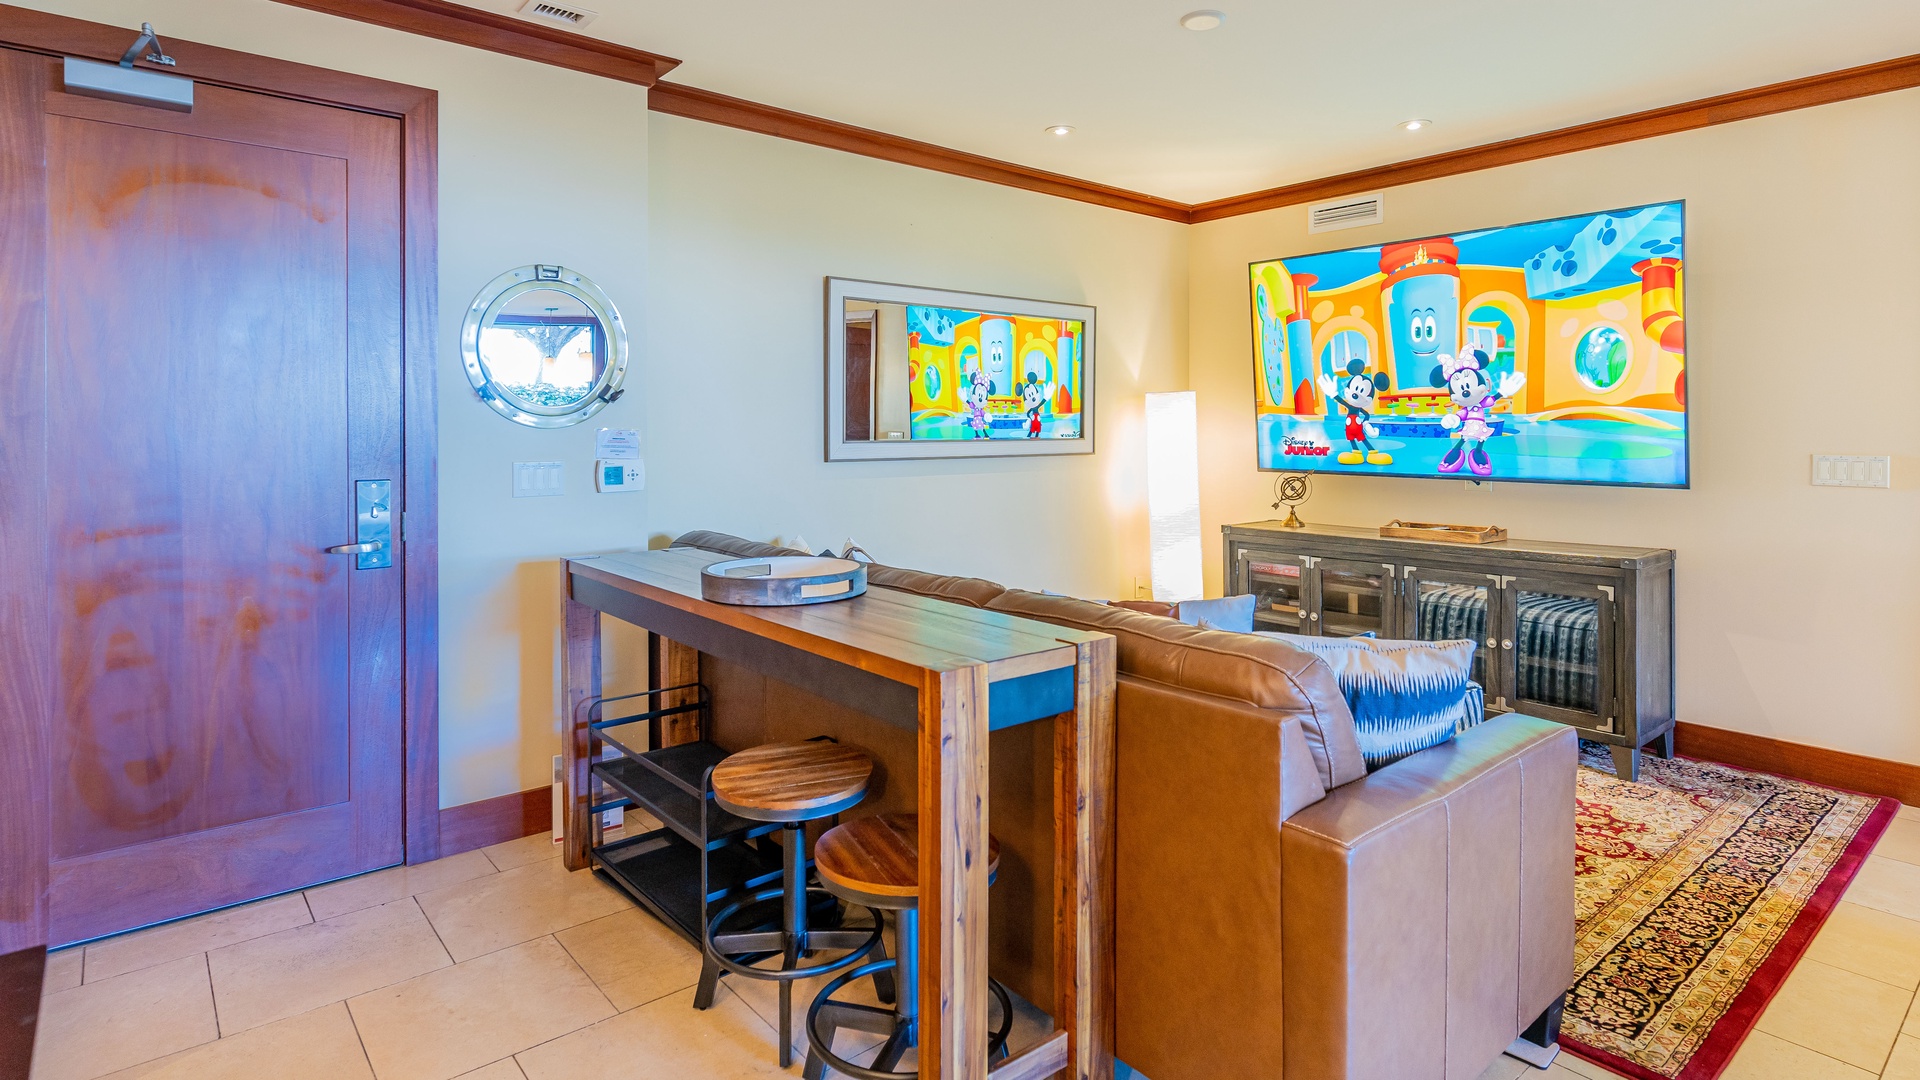 Kapolei Vacation Rentals, Ko Olina Beach Villas B102 - There's plenty of seating for entertaining or curling up for movie night.